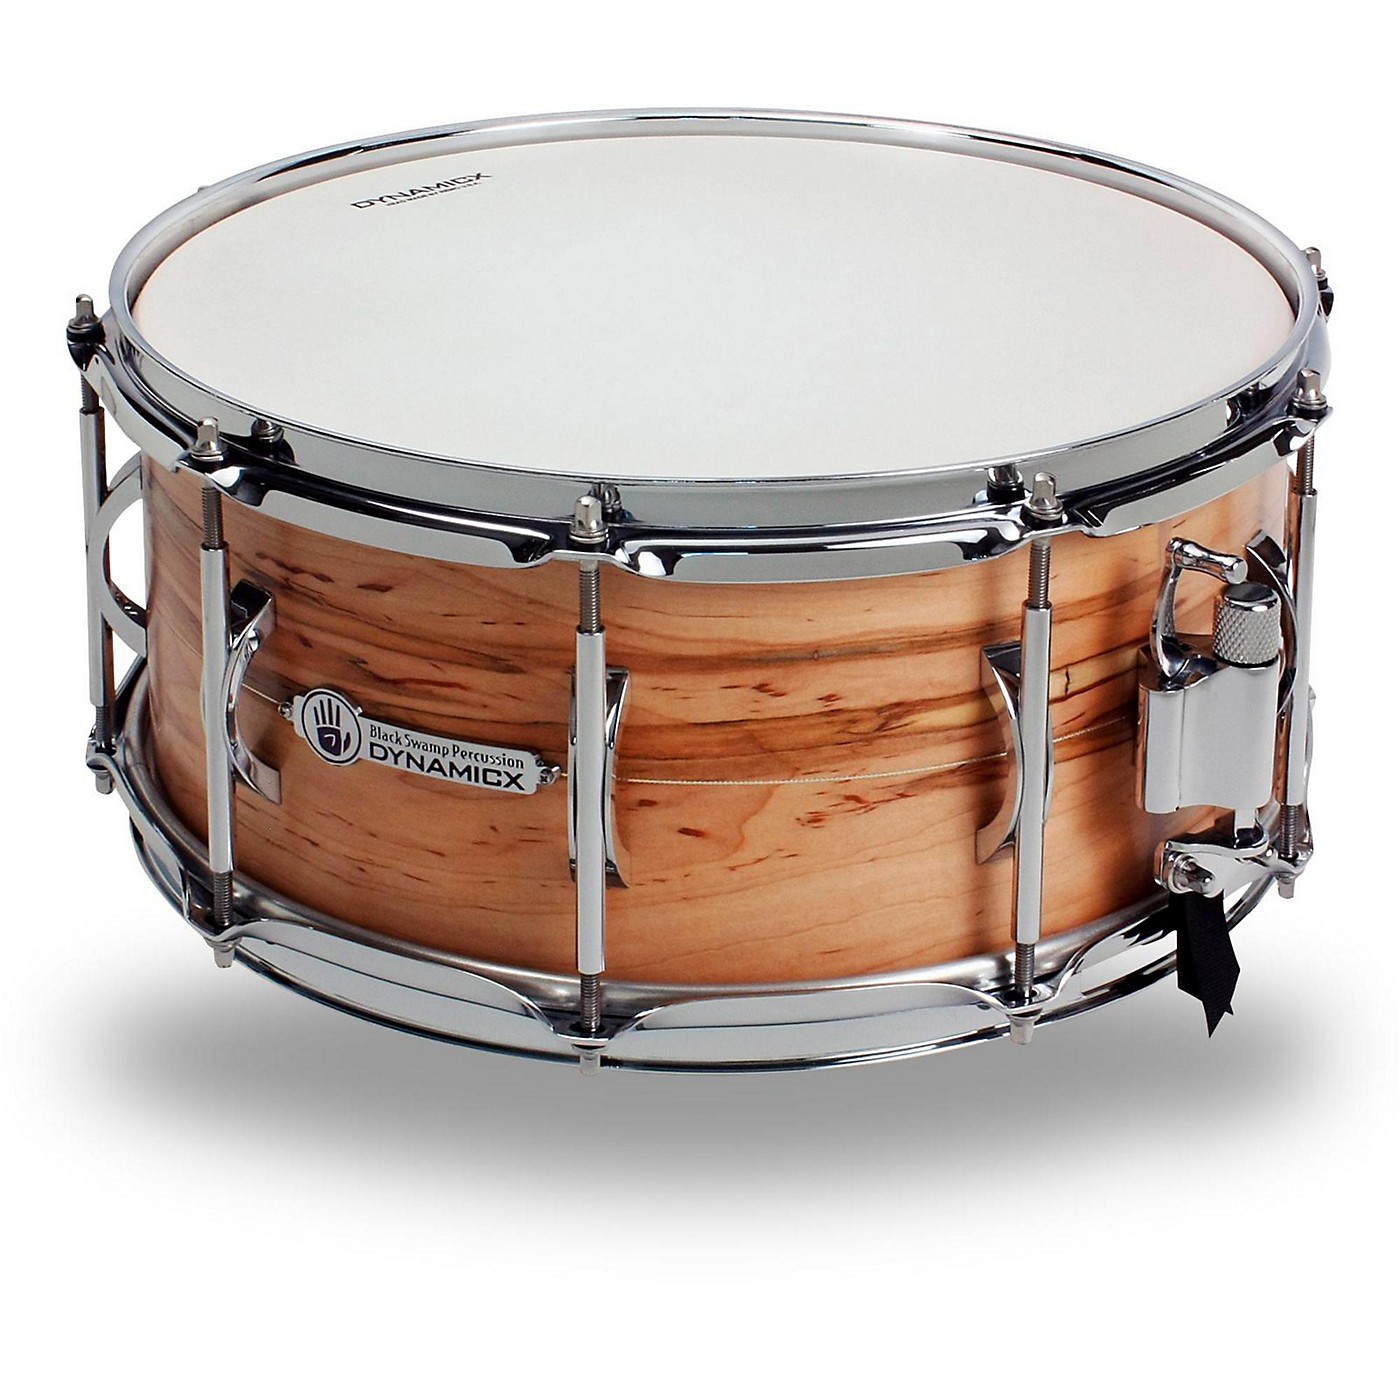 Black Swamp Percussion Dynamicx Live Series Snare Drum thumbnail